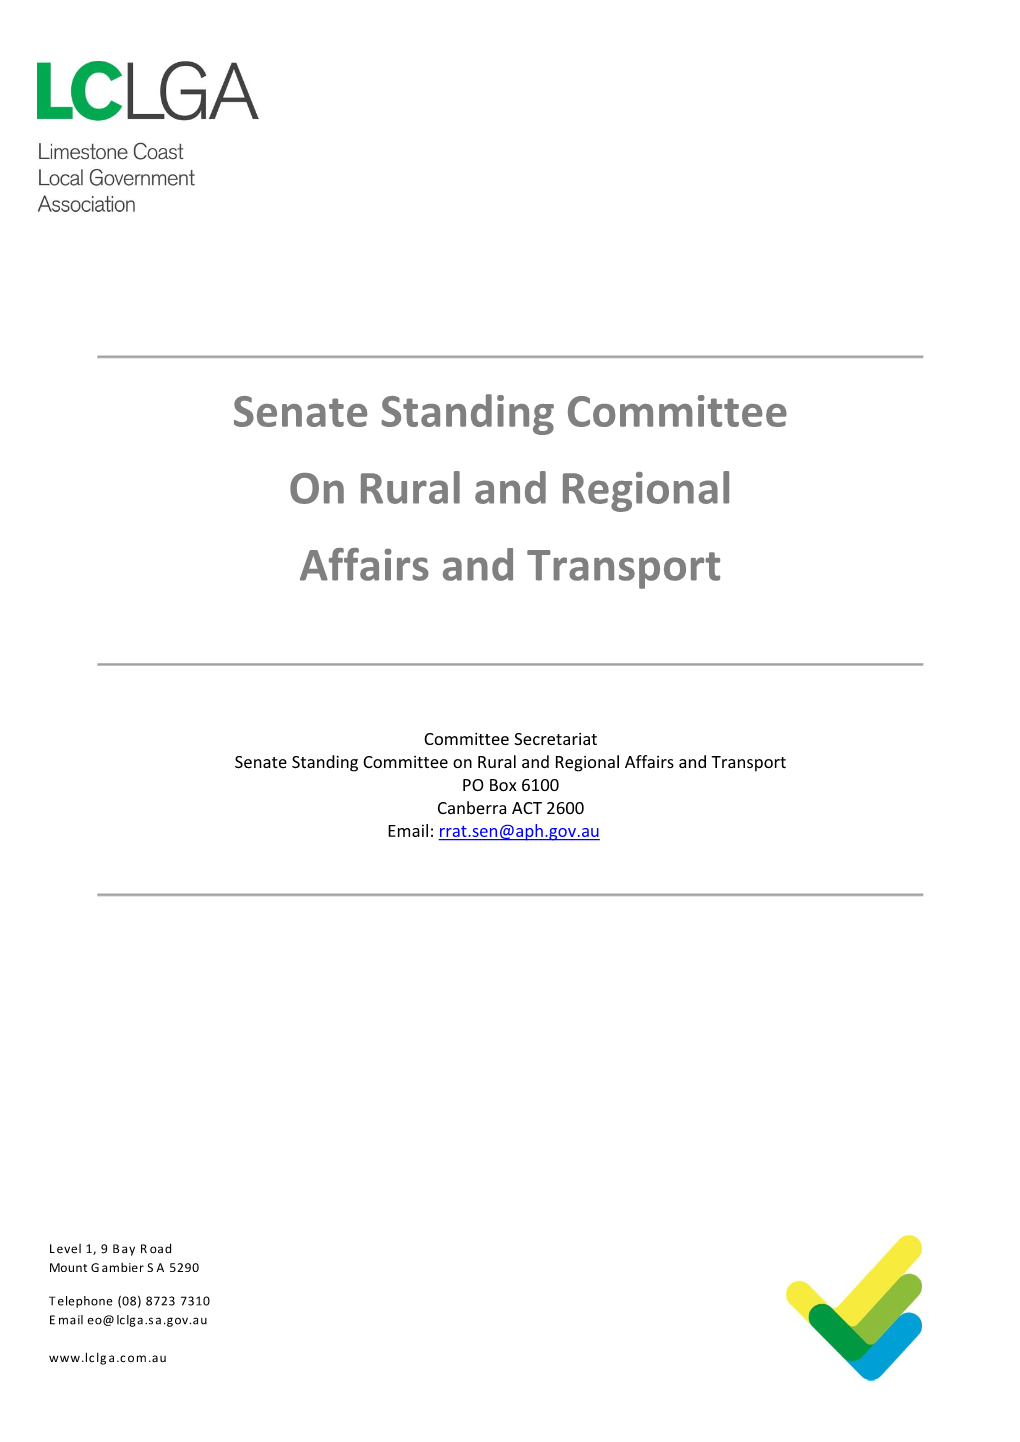 Senate Standing Committee on Rural and Regional Affairs and Transport